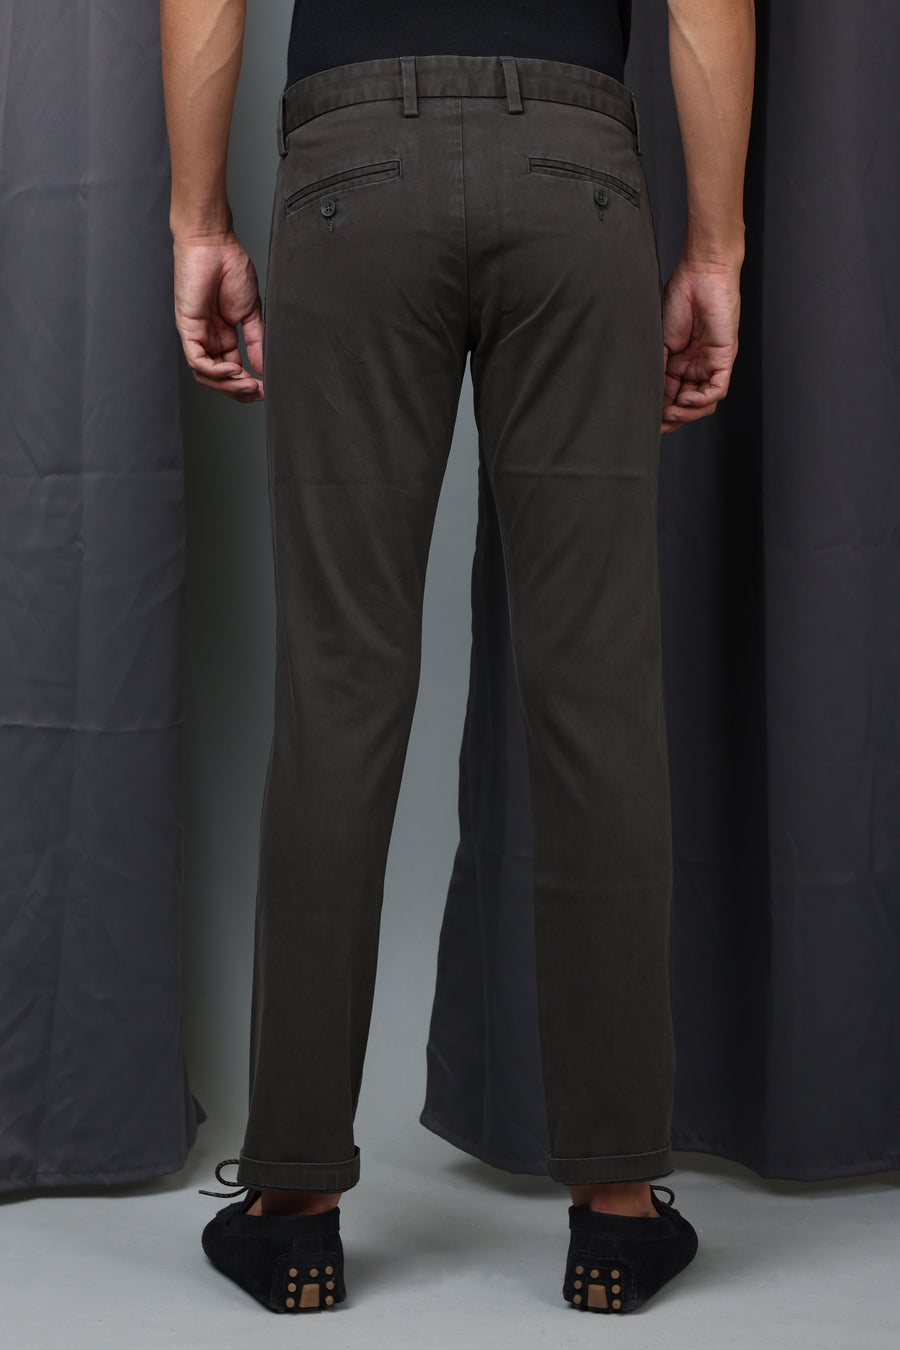 Smoothe - Premium Stretch Trouser - Olive